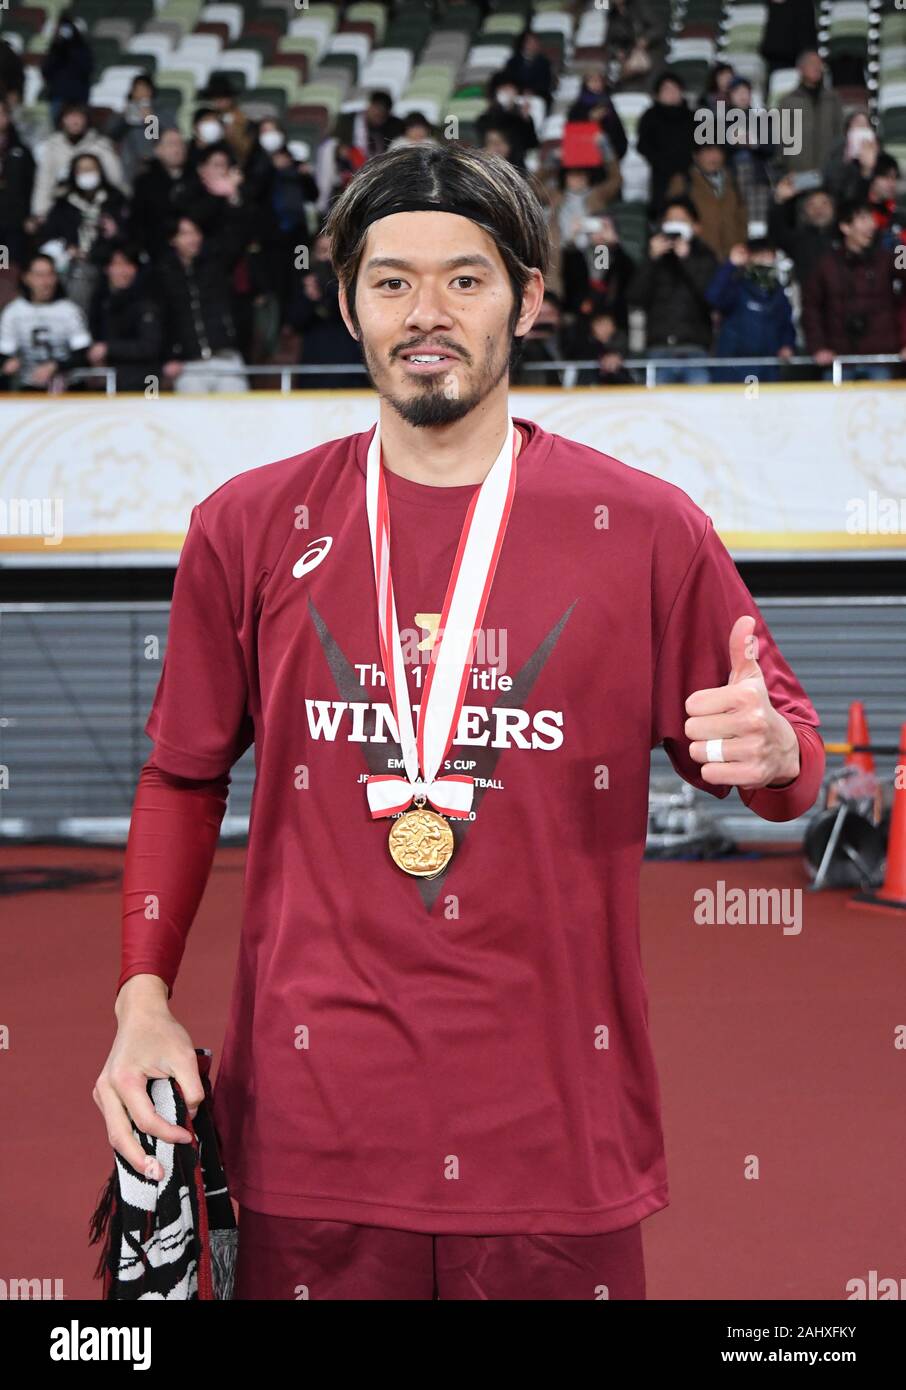 Tokyo, Japan. 1st Jan, 2020. Yamaguchi Hotaru of Vissel team pose for a photo during a moment of celebration. Vissel Kobe football team premieres at Tokyo National Stadium in Japan, becoming the first ever Vissel Kobe team to win an Emperor's Cup JFA championship. The game was held at the stadium that will serve as the main venue of the Tokyo 2020 Olympic Games. Photo taken onã€€Wednesday January 1, 2020. Photo by: Ramiro Agustin Vargas Tabares Credit: Ramiro Agustin Vargas Tabares/ZUMA Wire/Alamy Live News Stock Photo